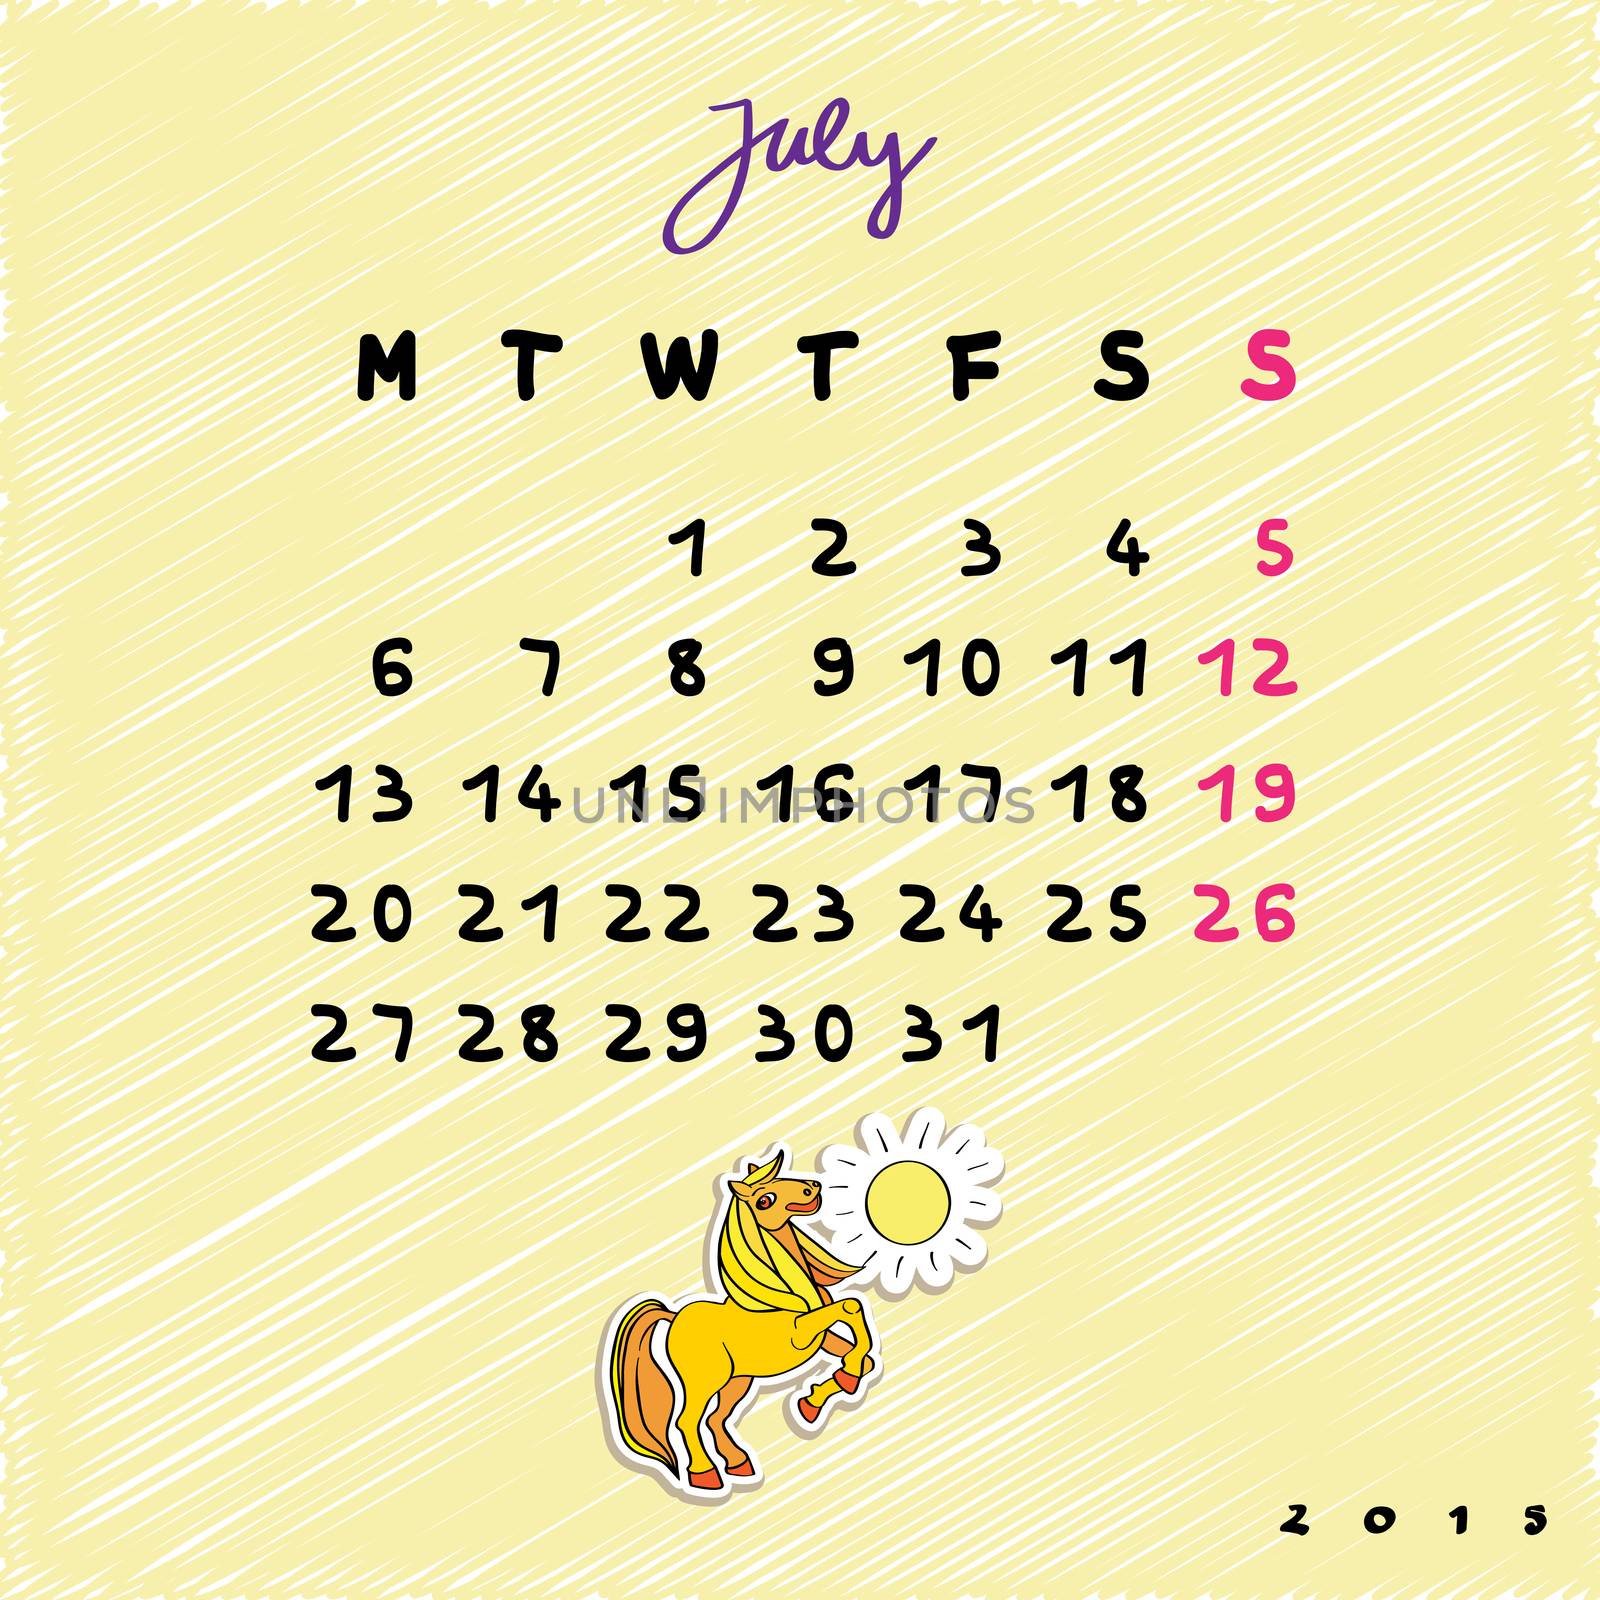 Calendar 2015 with toy horse, graphic illustration of July month calendar with original hand drawn text